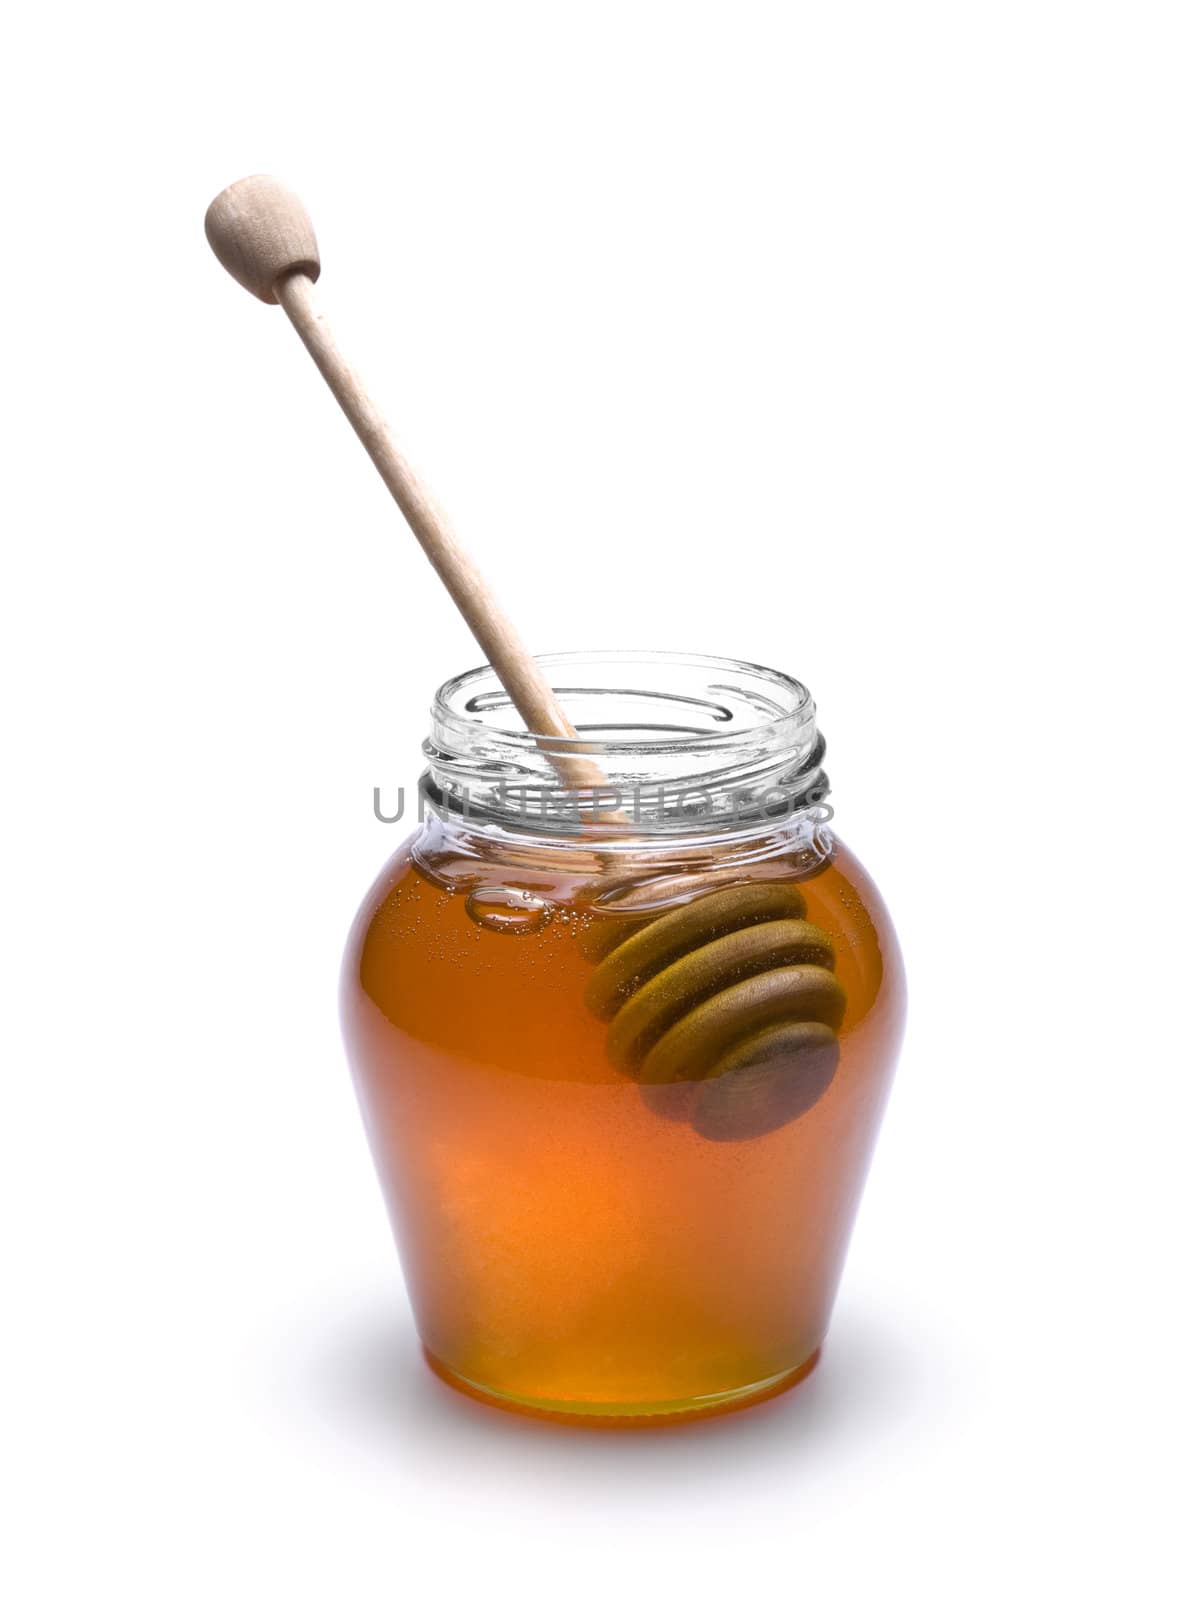 Jar of honey with a wooden drizzler inside. Isolated on white background.